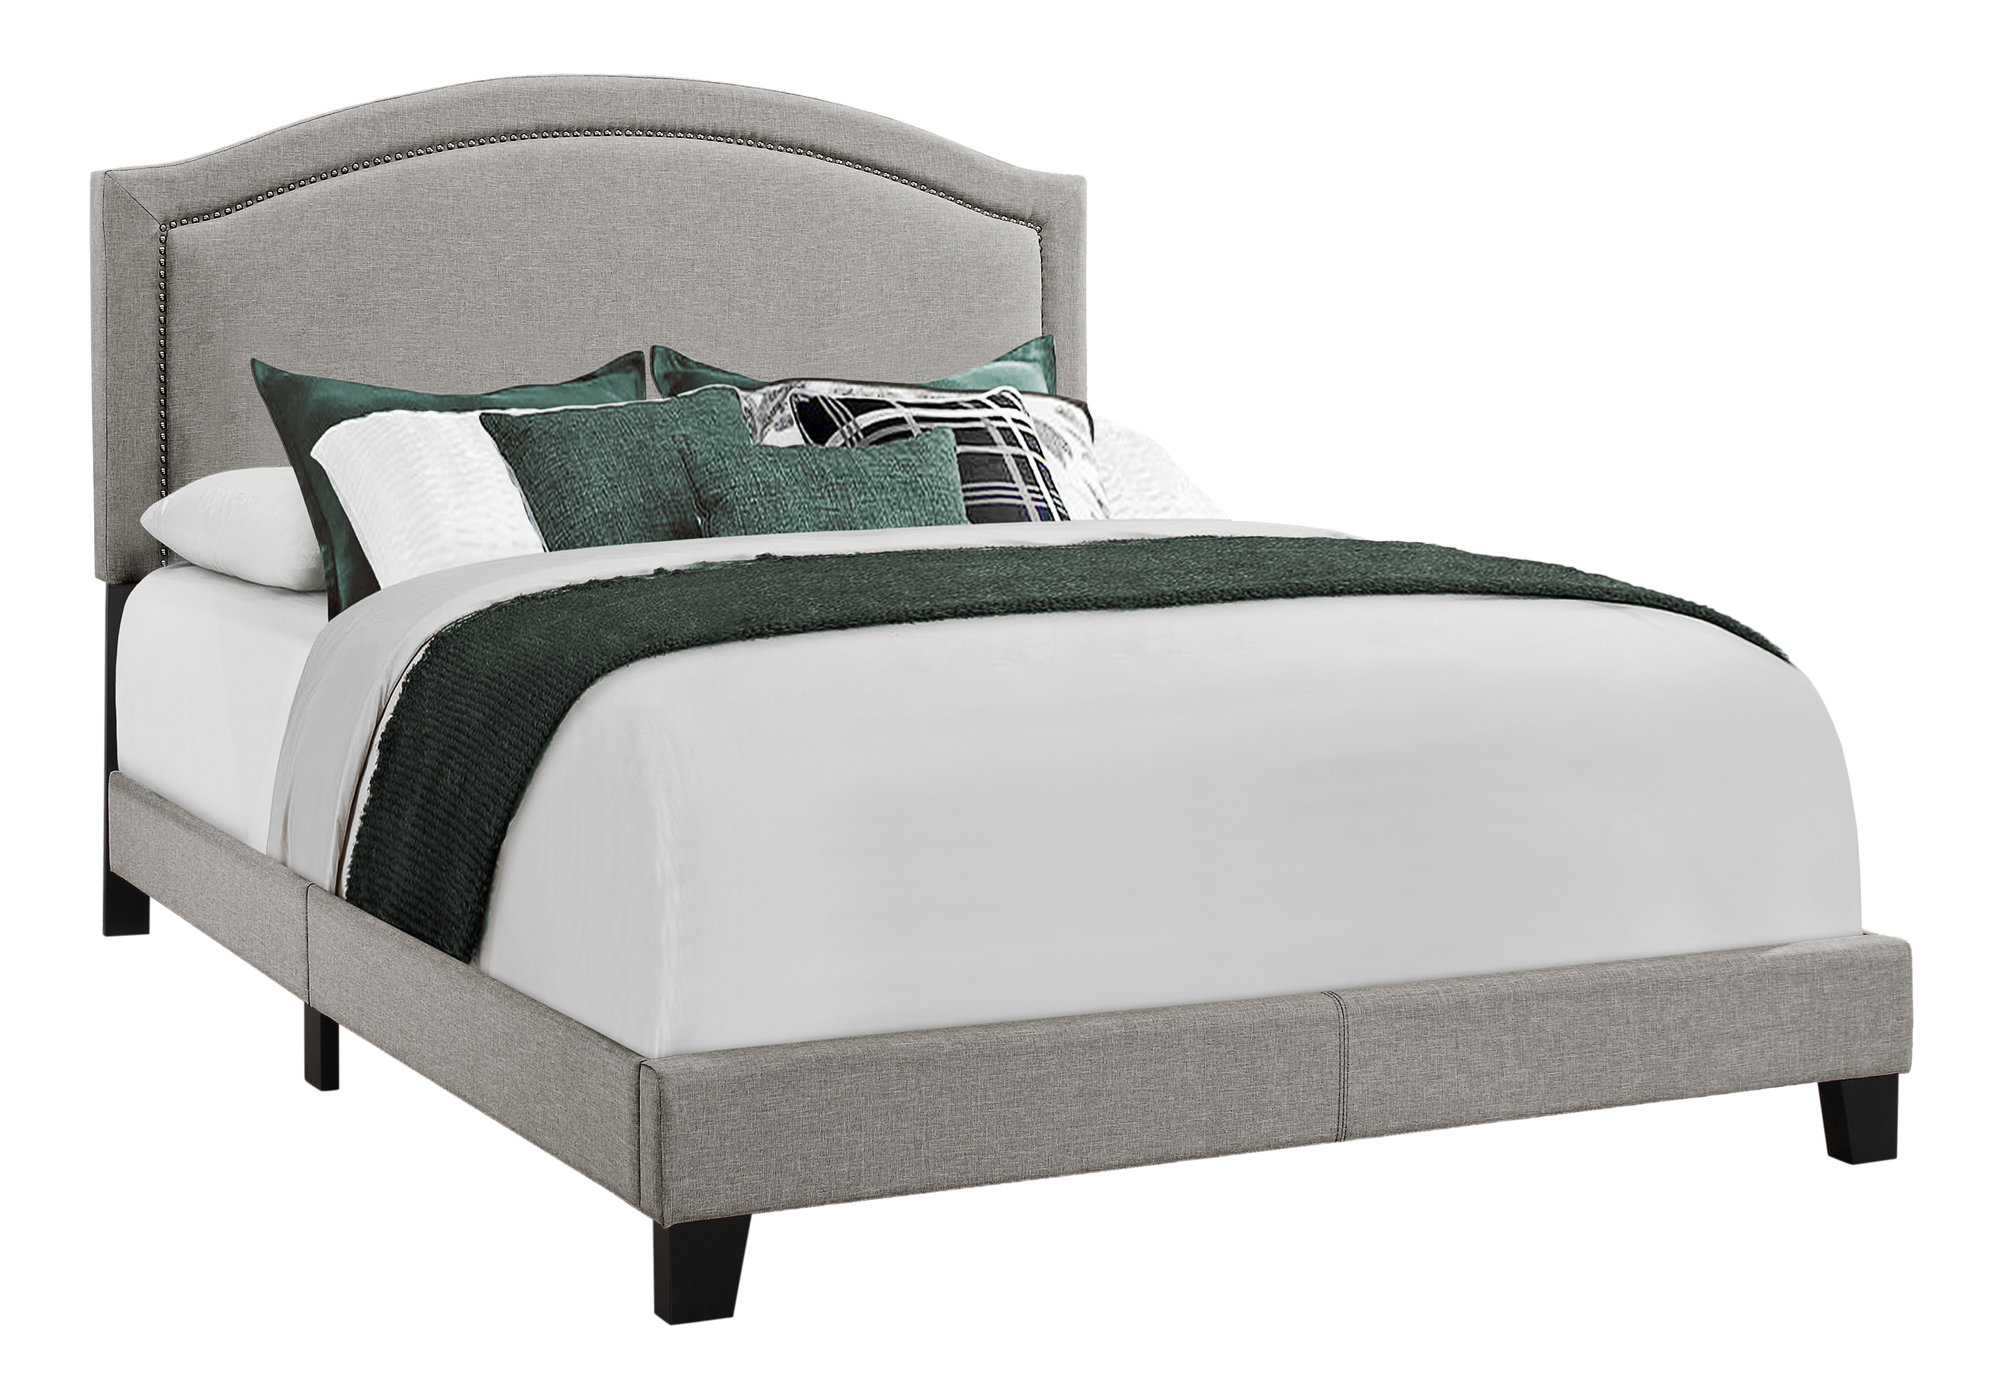 BED - QUEEN SIZE / CLASSIC GREY LINEN WITH CHROME TRIM